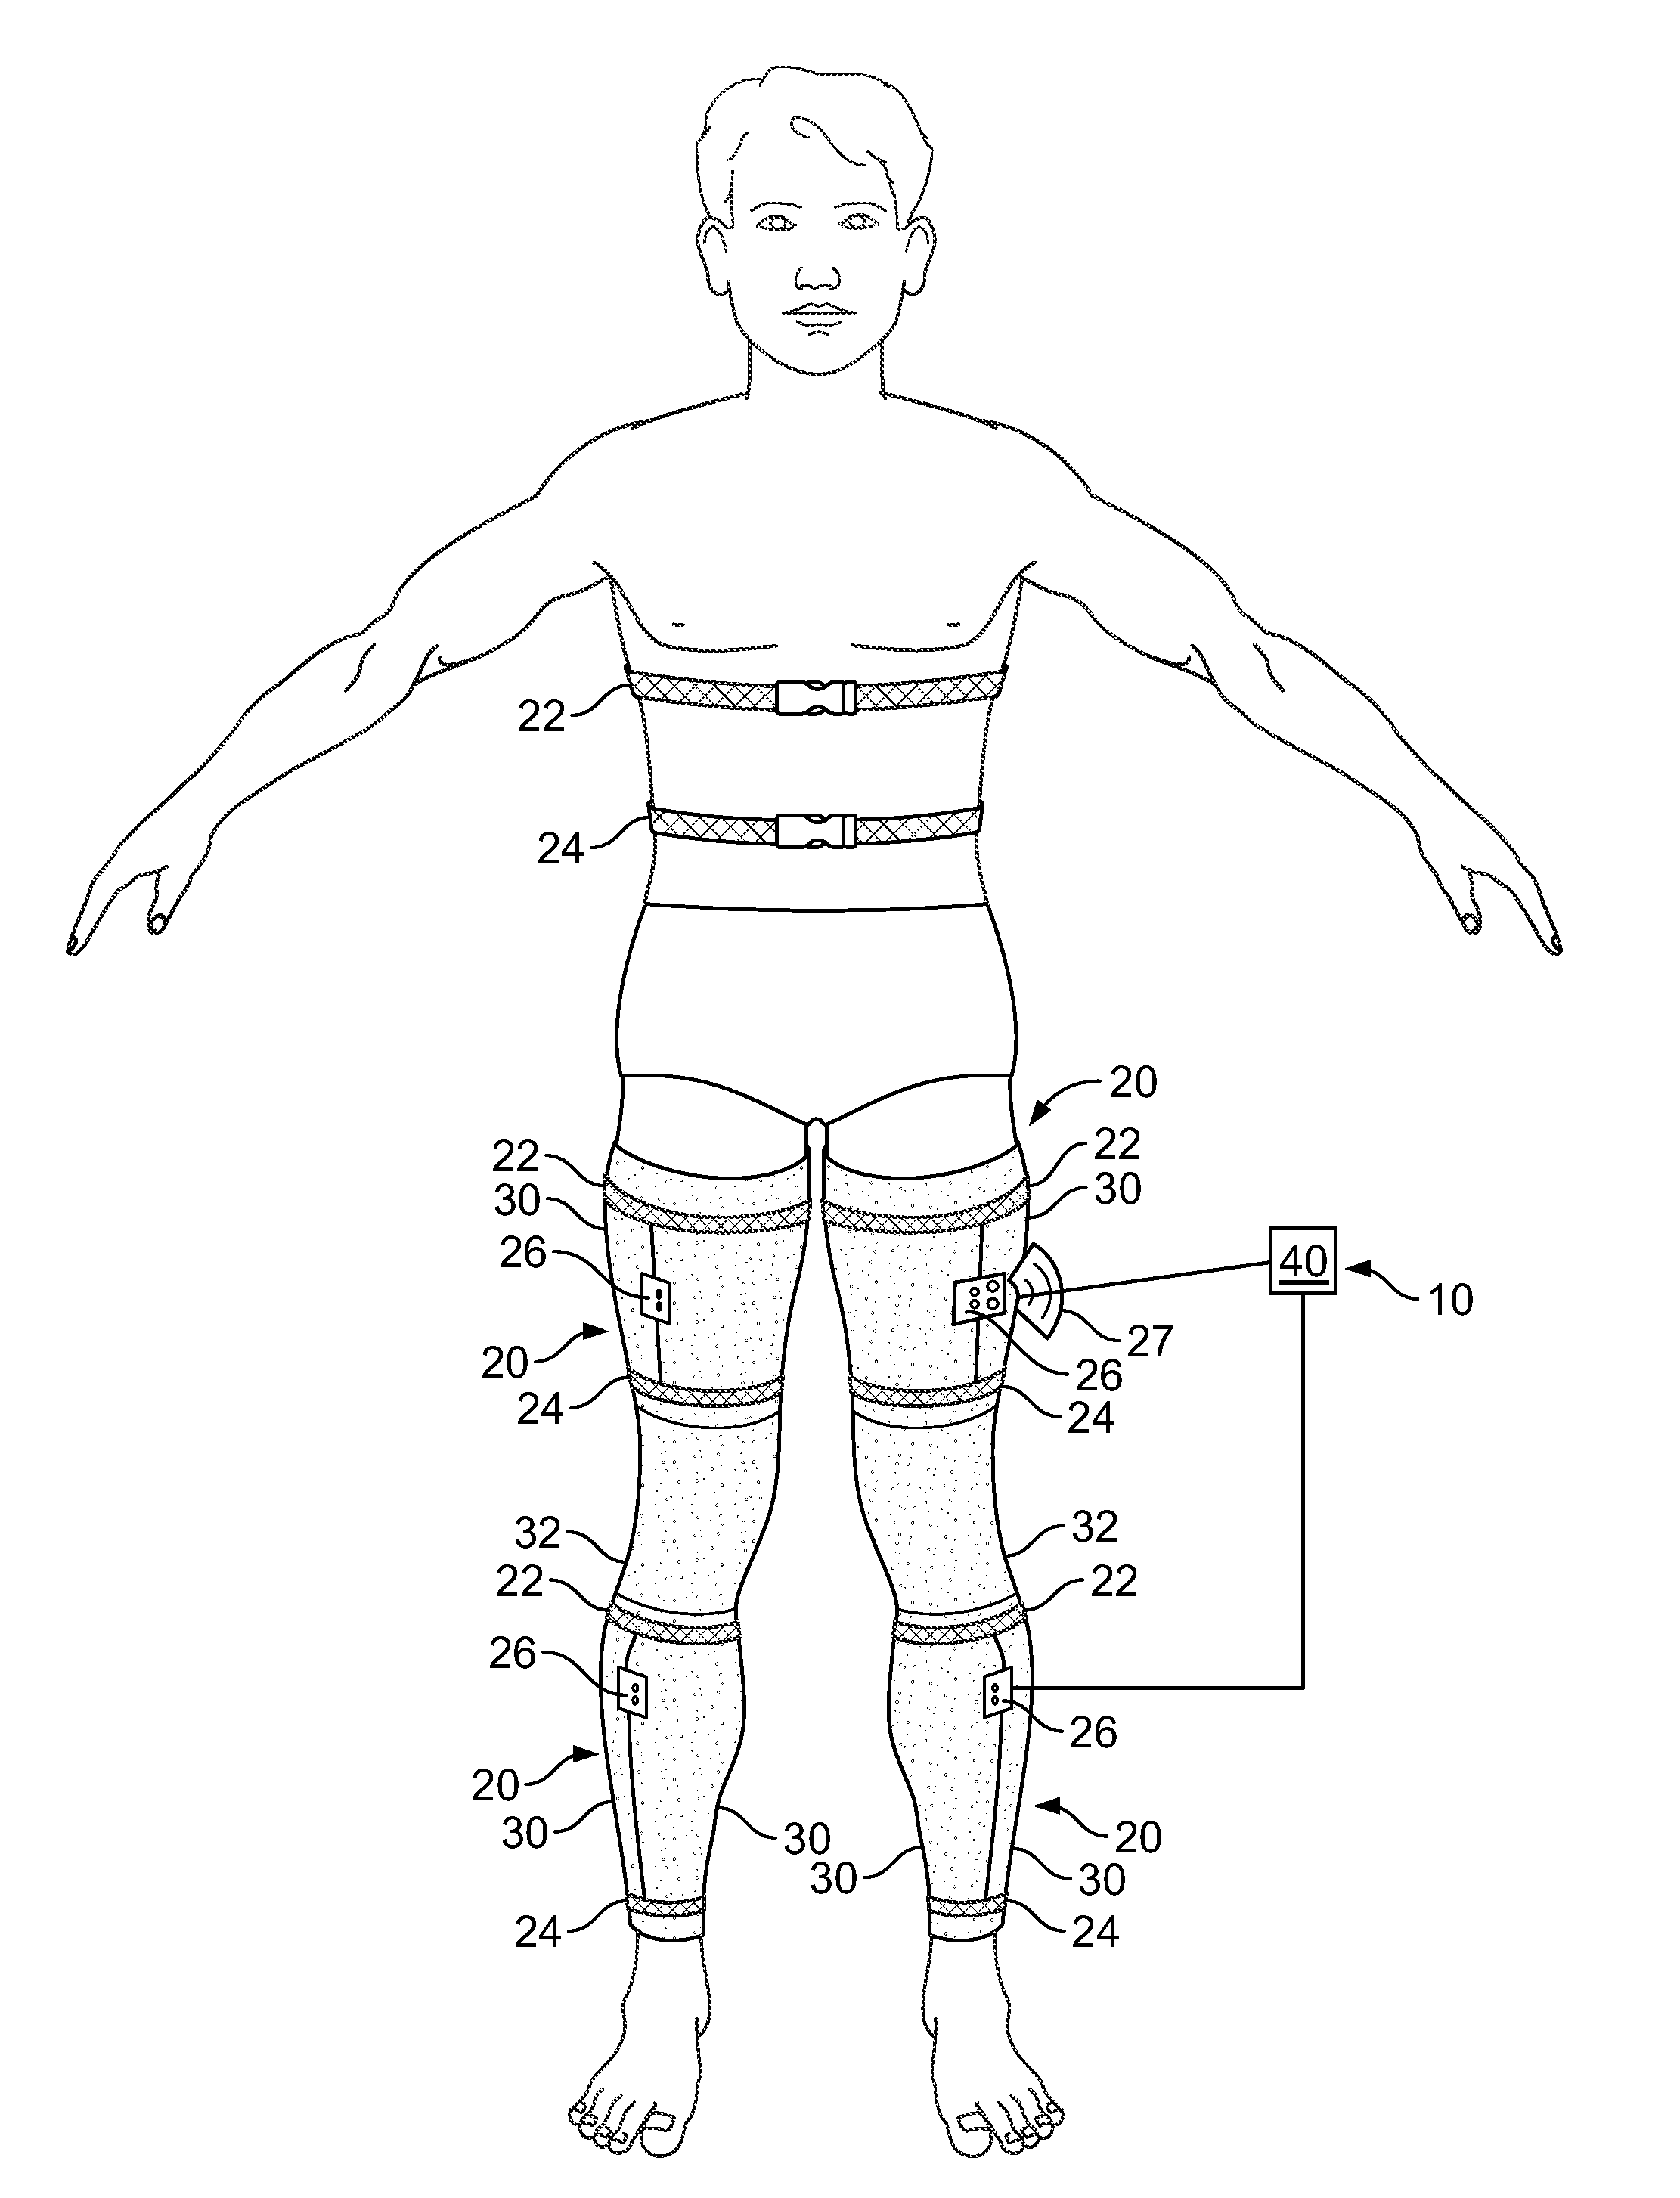 System for using electrical muscle stimulation to increase blood flow in body parts